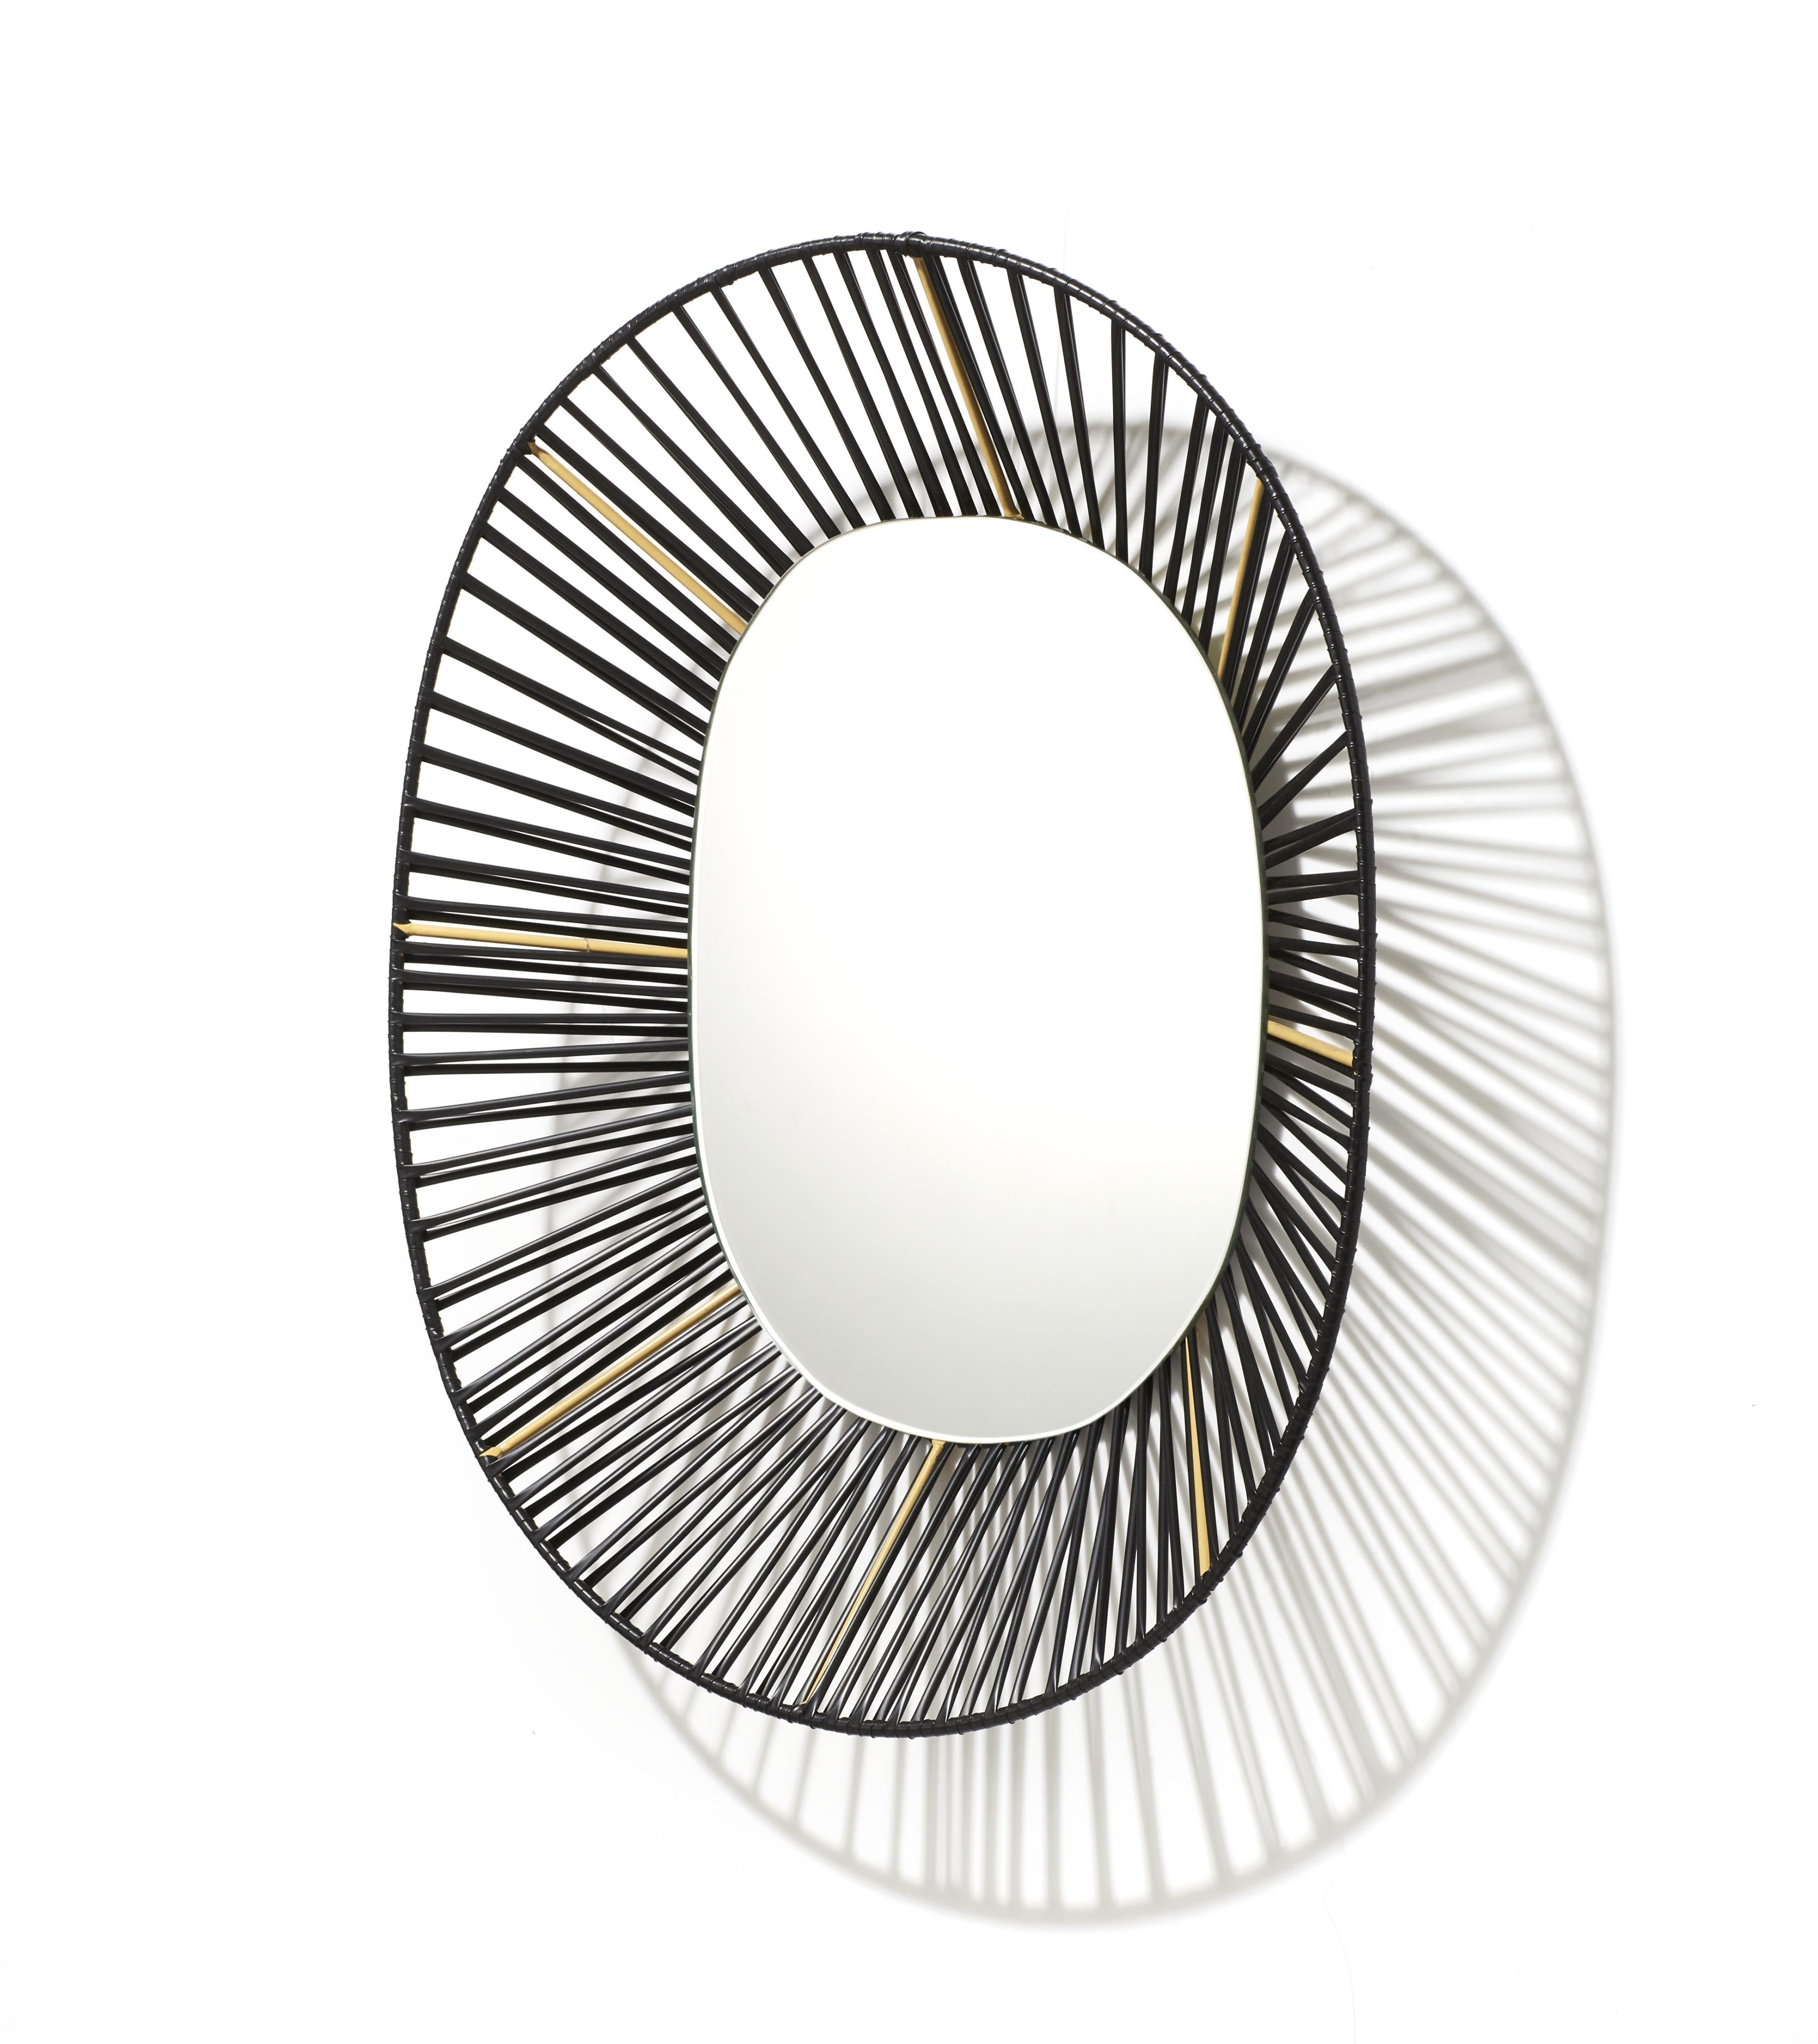 Cesta oval mirror by Pauline Deltour
Materials: Galvanized and powder-coated tubular steel frame. PVC strings.
Technique: Made from recycled plastic. Hand-woven in Colombia. 
Dimensions: W 47.5 x H 54.3 cm 
Available in colors: oliv green/